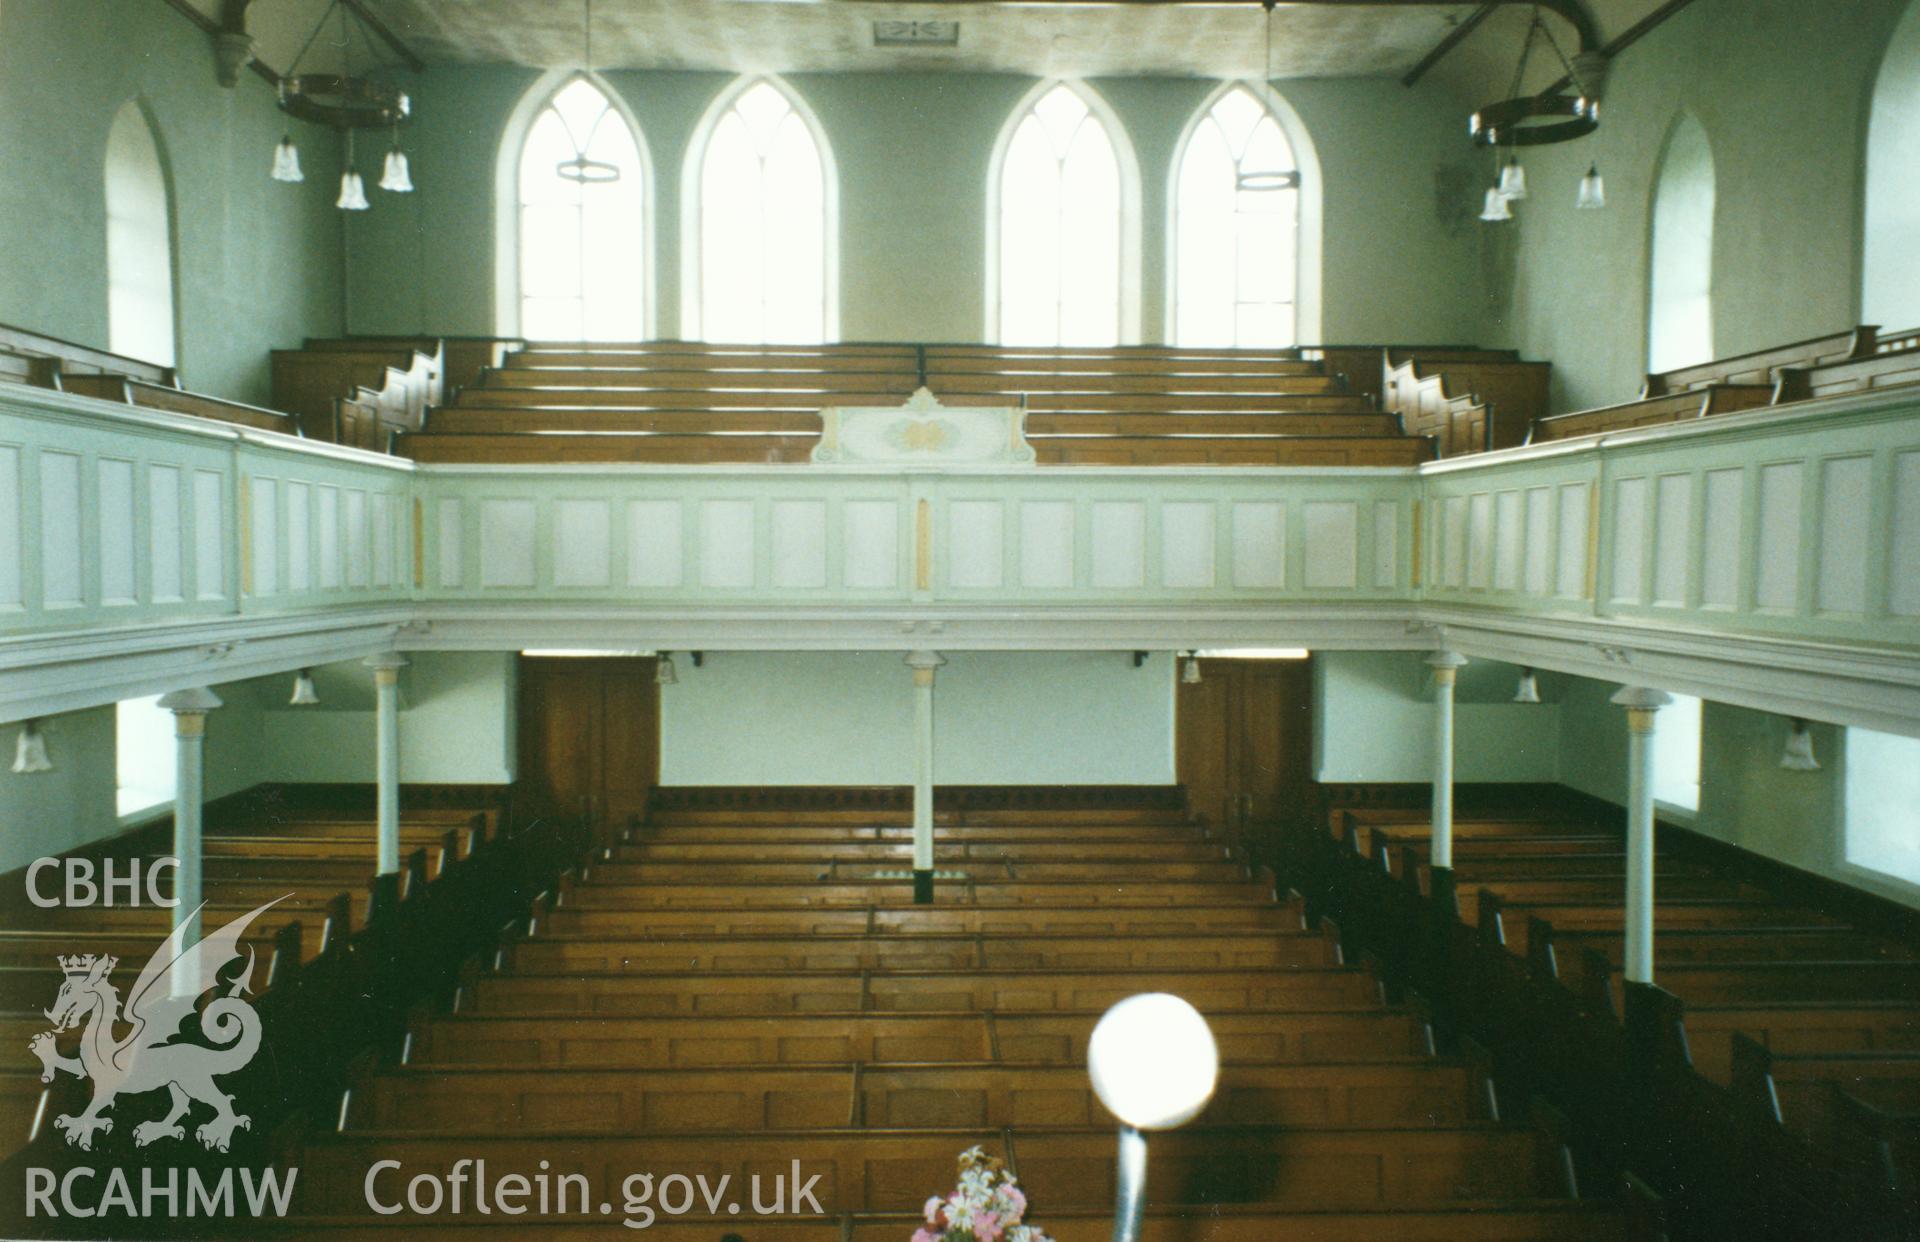 Digital copy of a colour photograph showing an interior view of Welsh Independent Chapel, Union Street, Carmarthen, taken by Robert Scourfield, 1996.